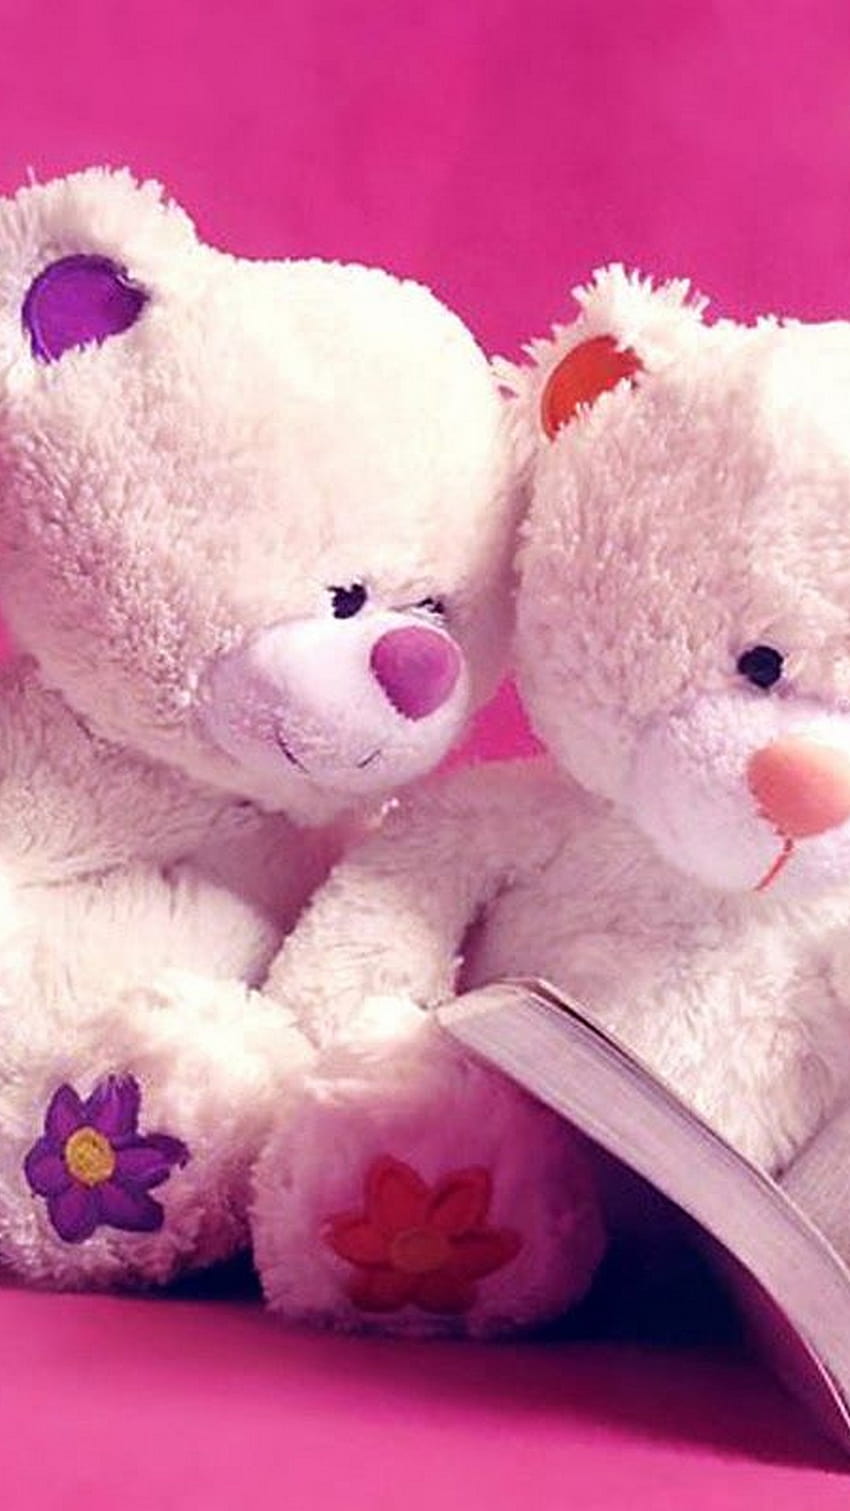 Cute Teddy Bear Wallpapers for little kids and children